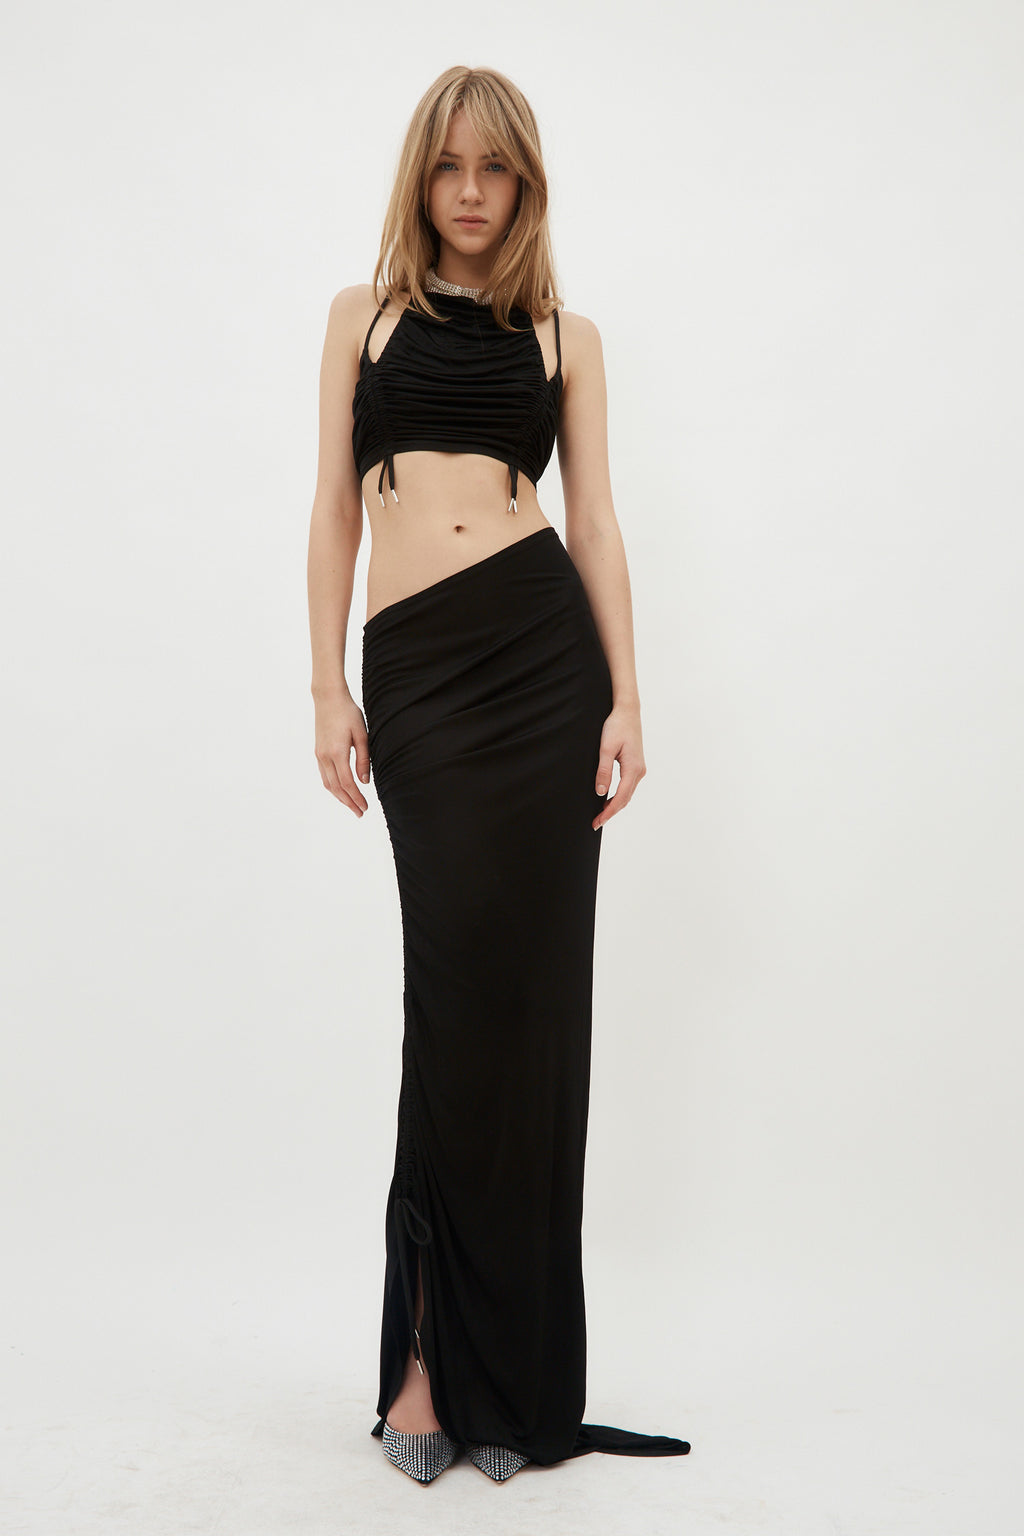 Ruched Black Maxi Skirt